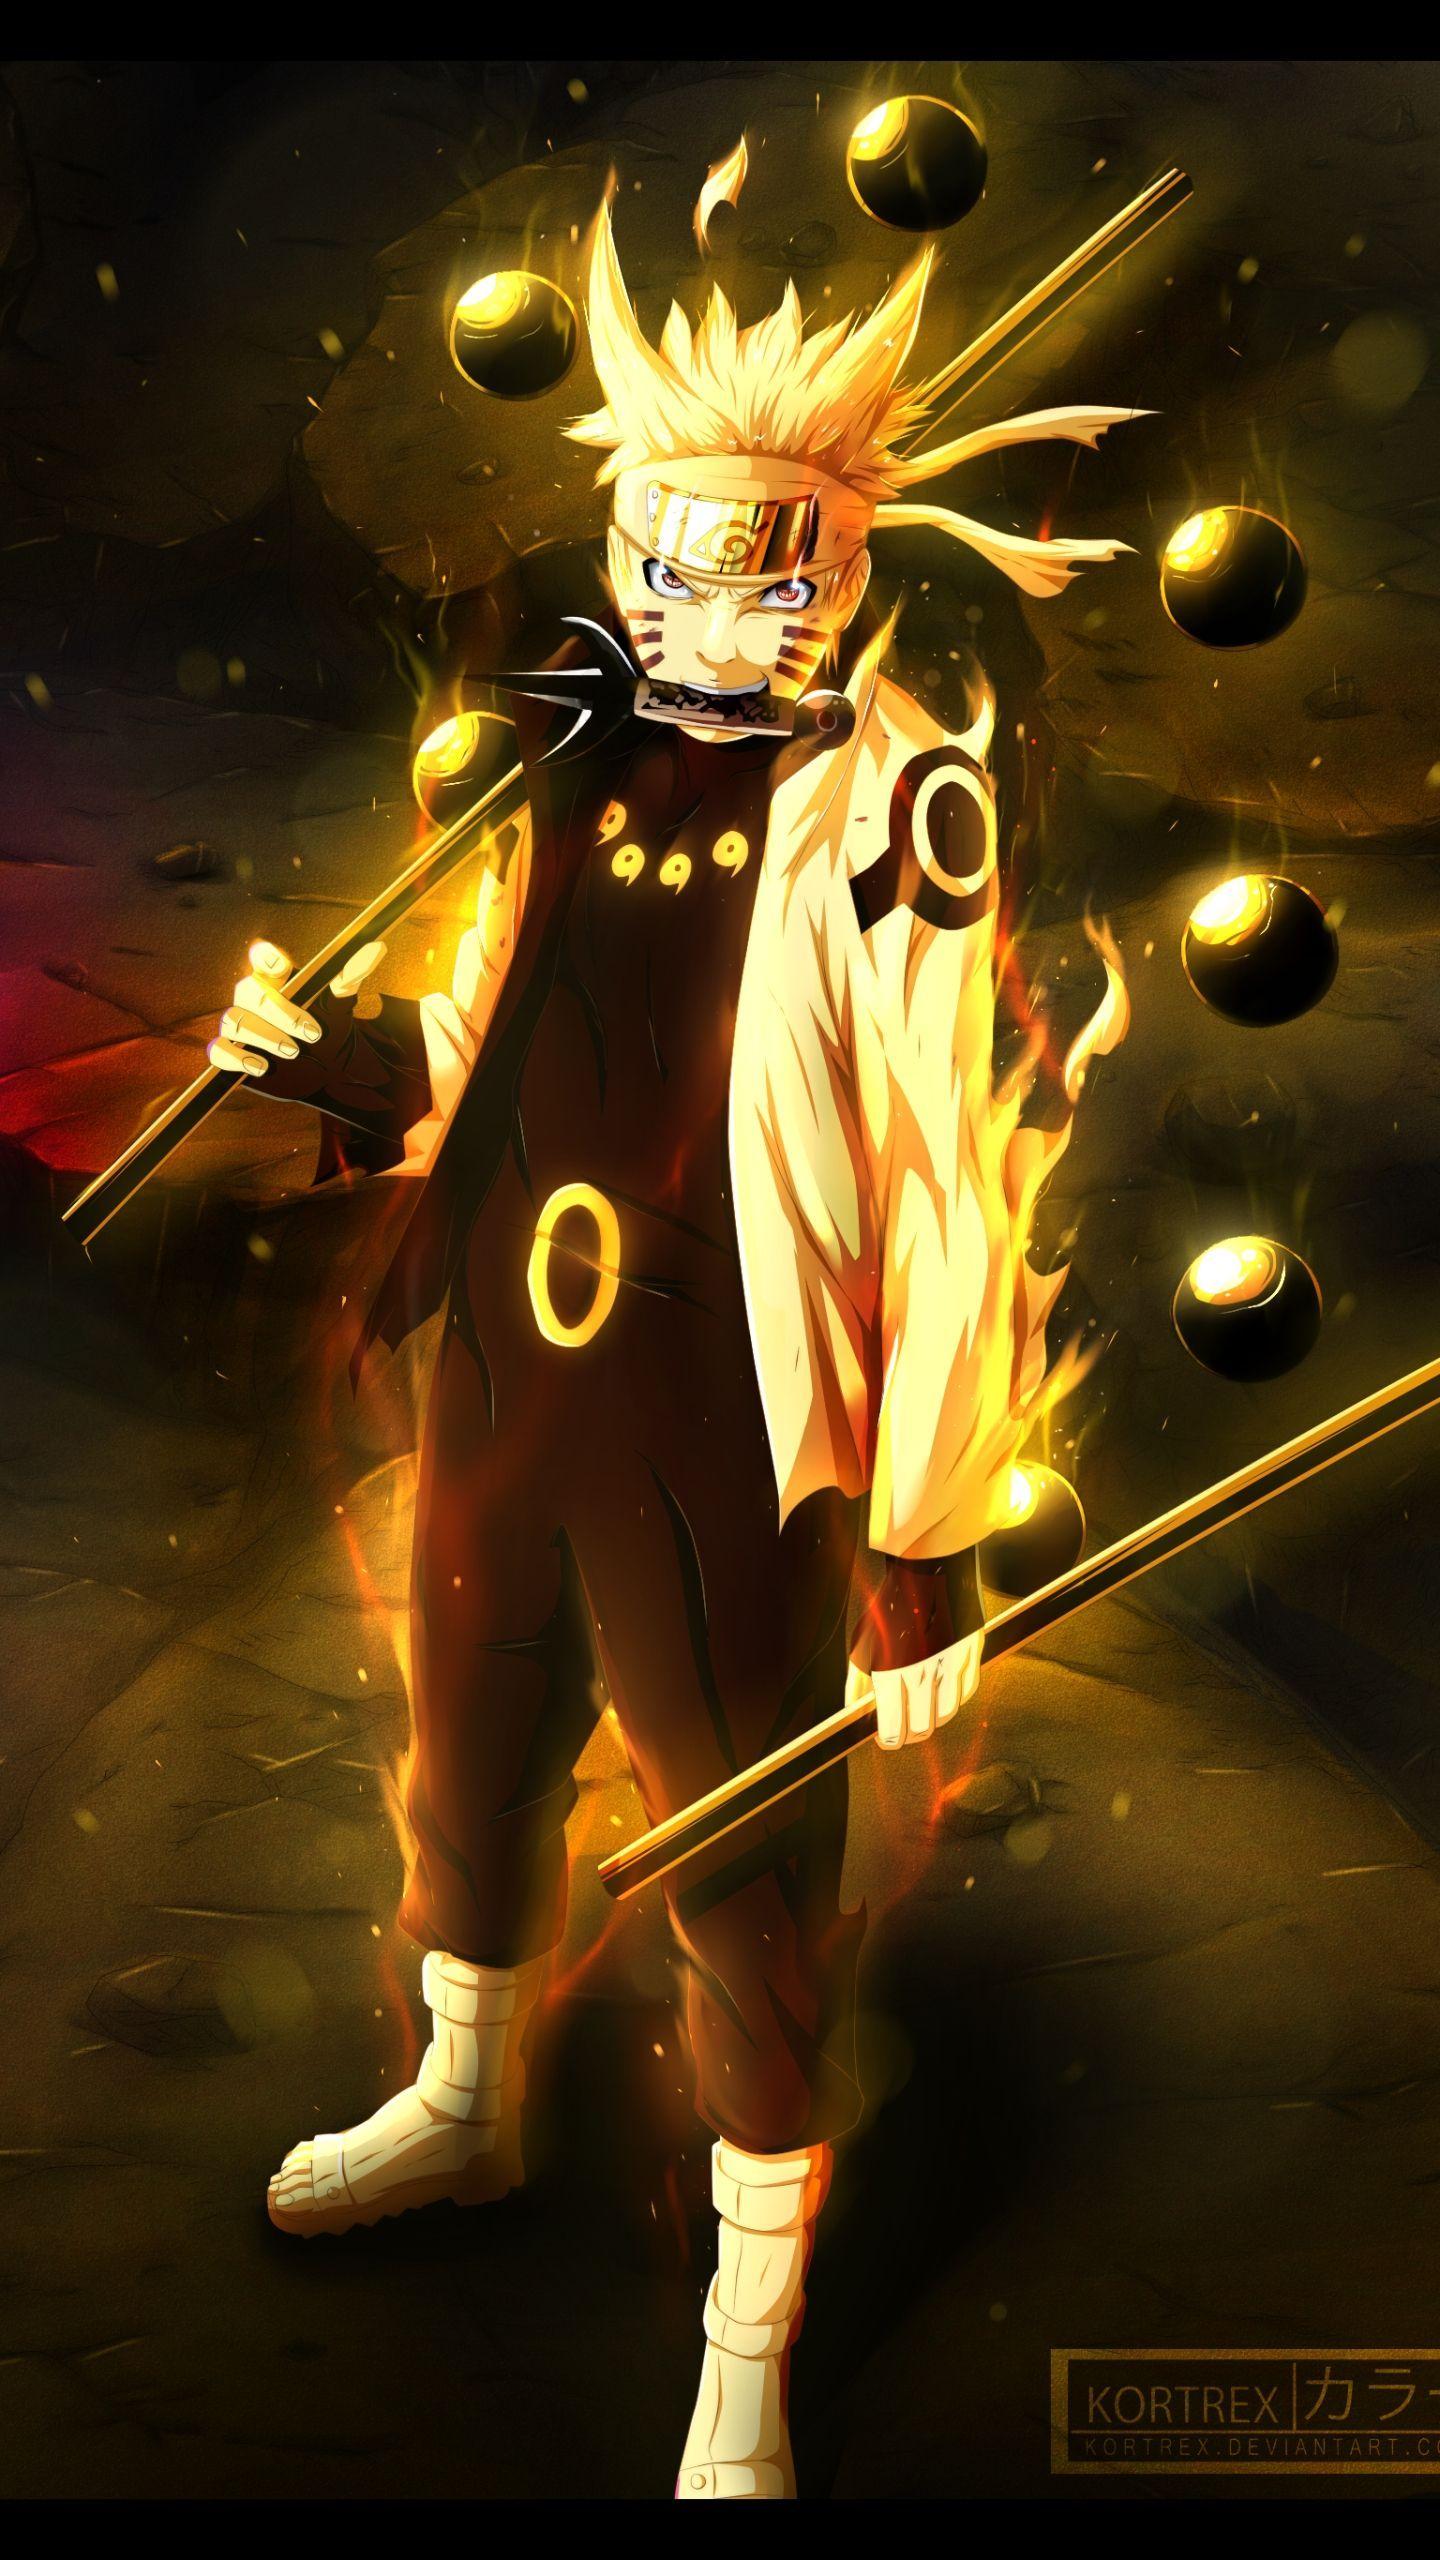 Naruto Live Wallpapers Iphone X - Instituto